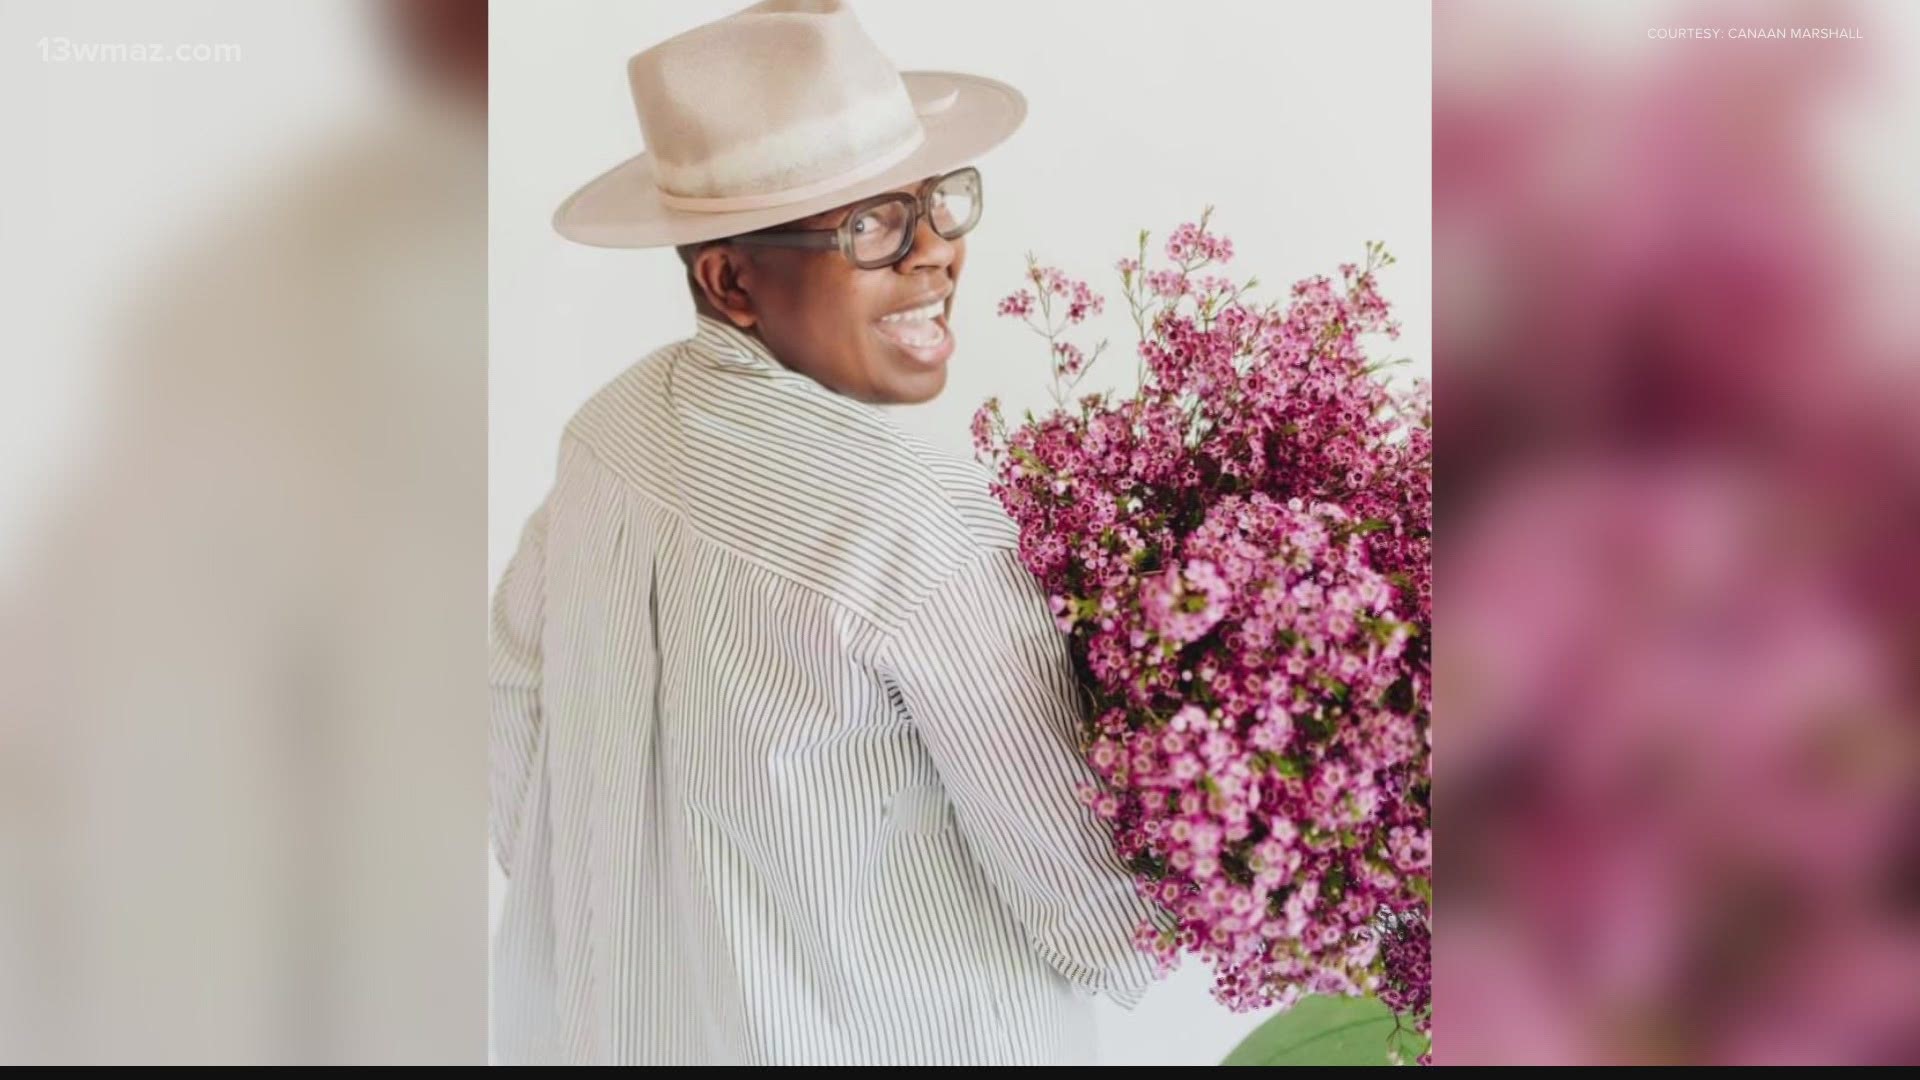 Macon native and florist Canaan Marshall is putting his design skills to the test in season two of 'Full Bloom' on HBO Max